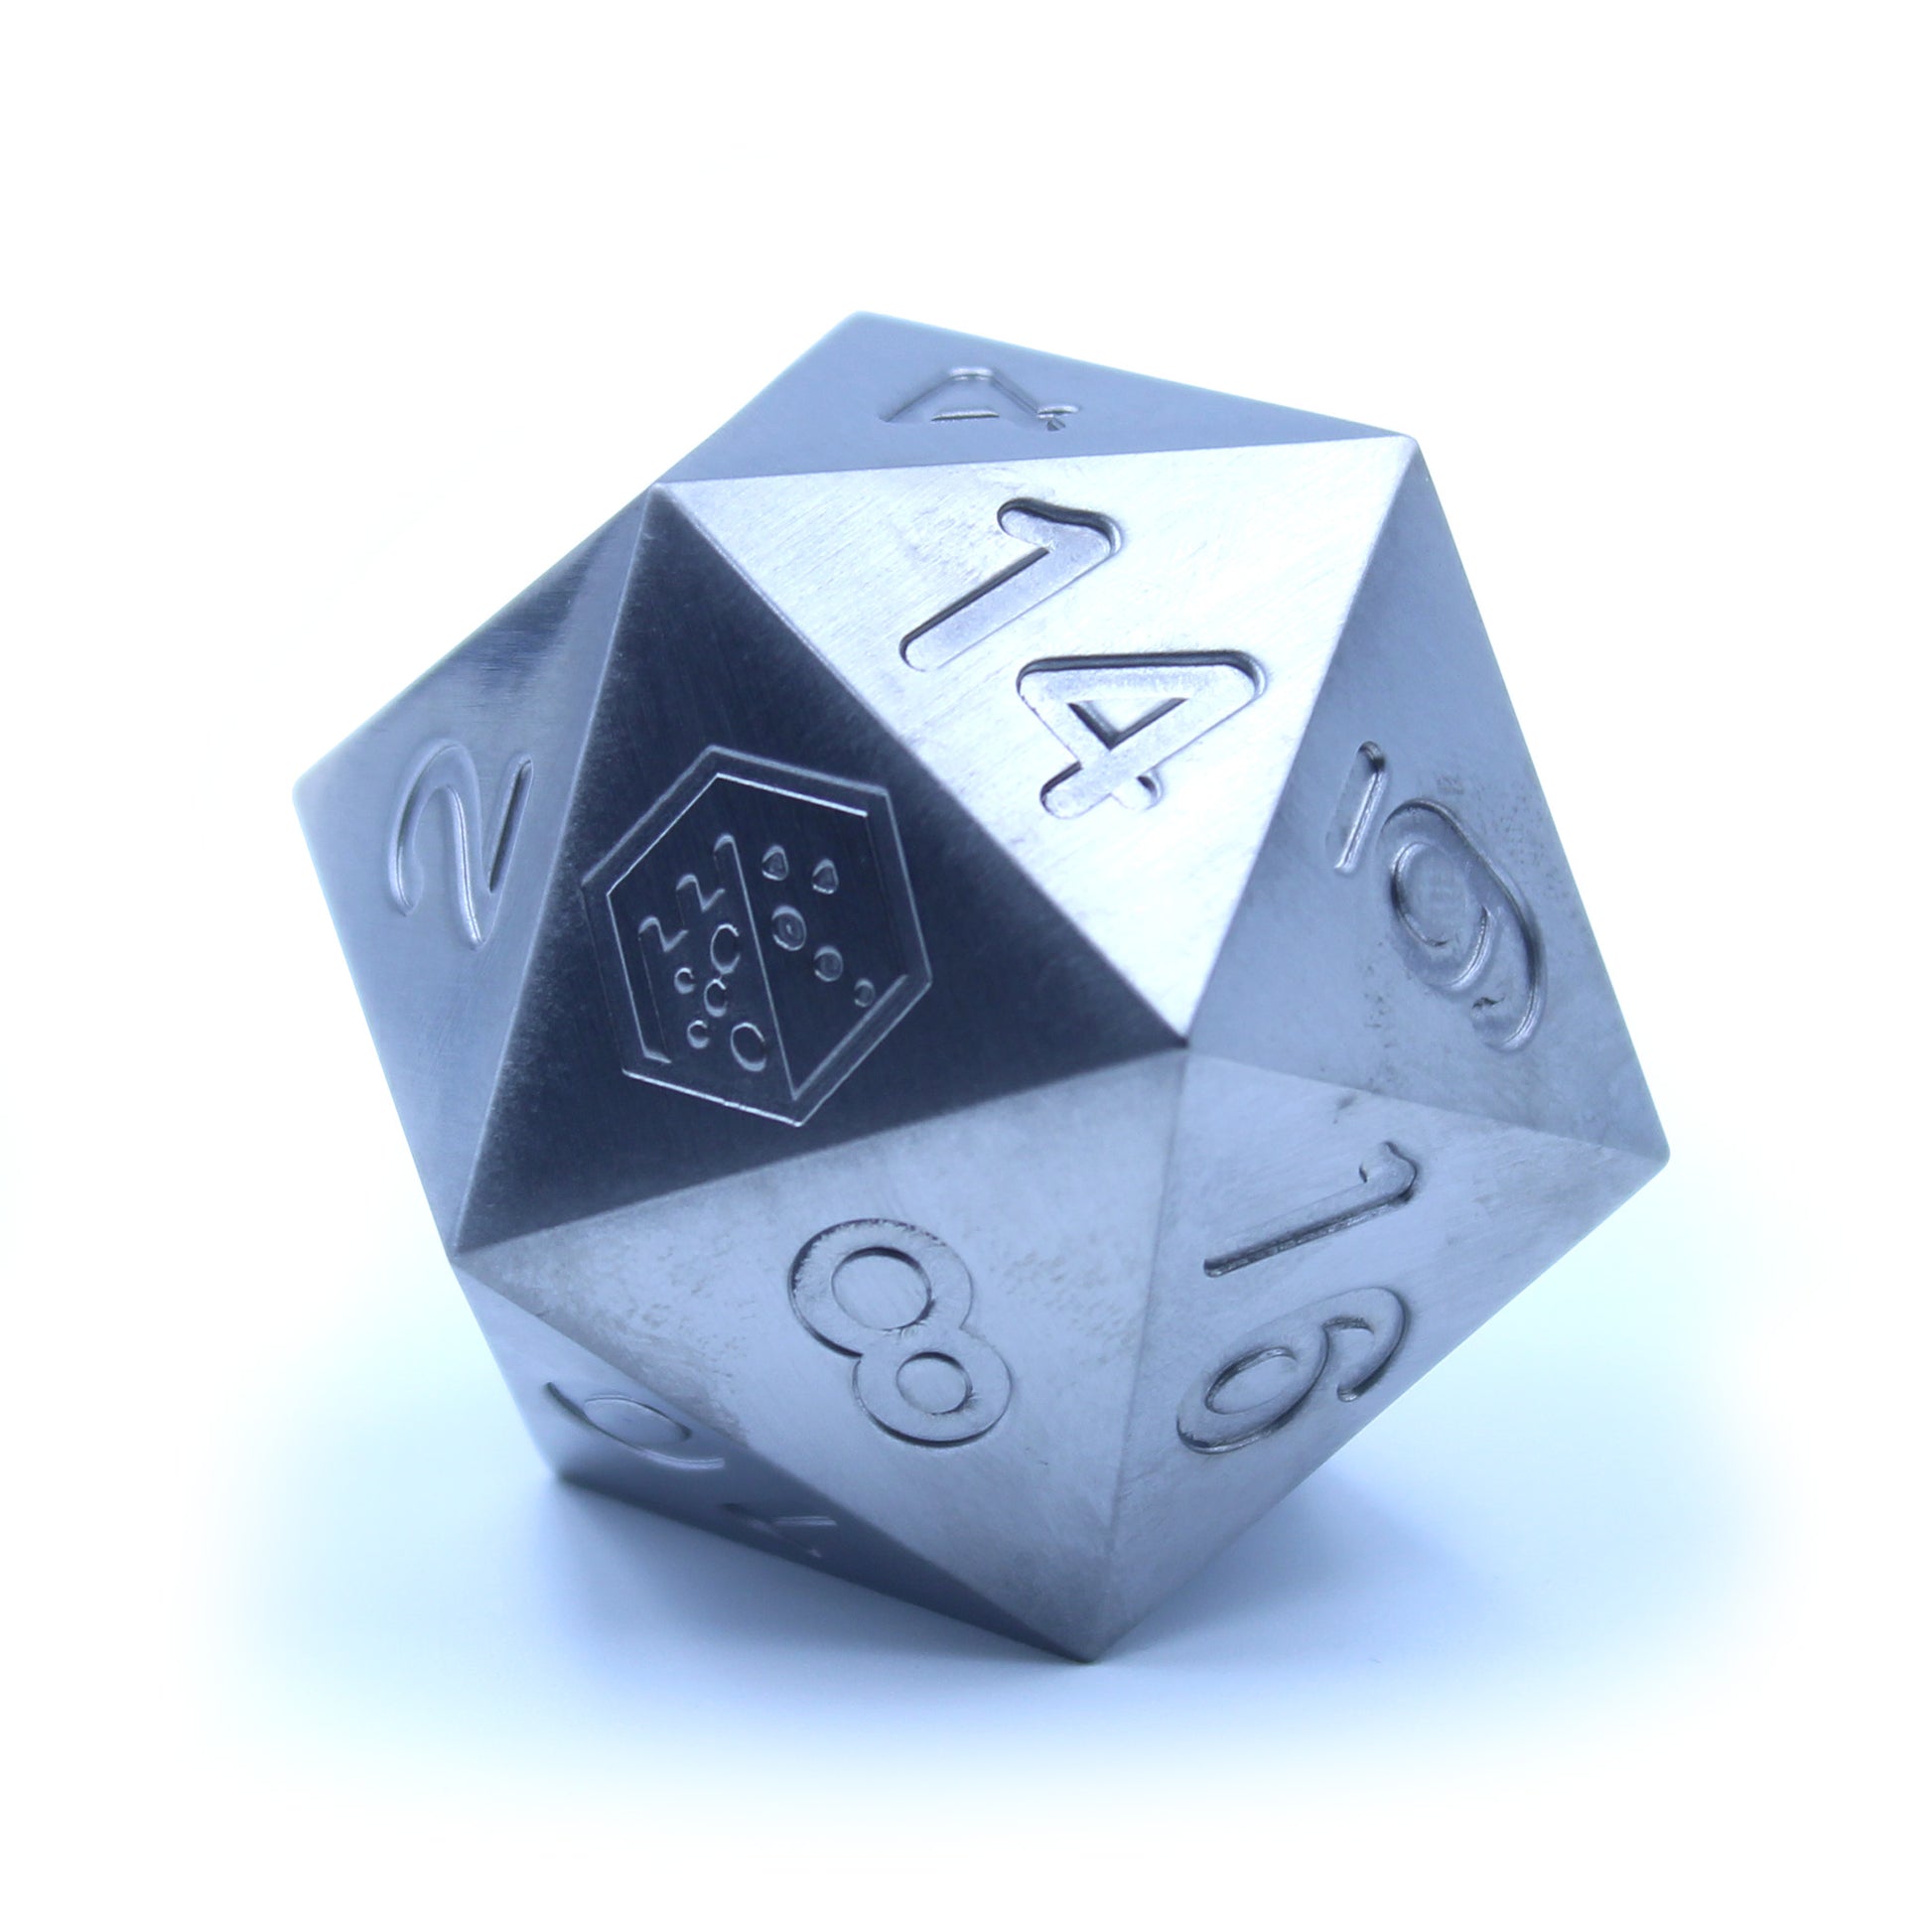 Massive Tungsten d20 - Jumbo 45mm Die for Tabletop Games – Dice Dungeons